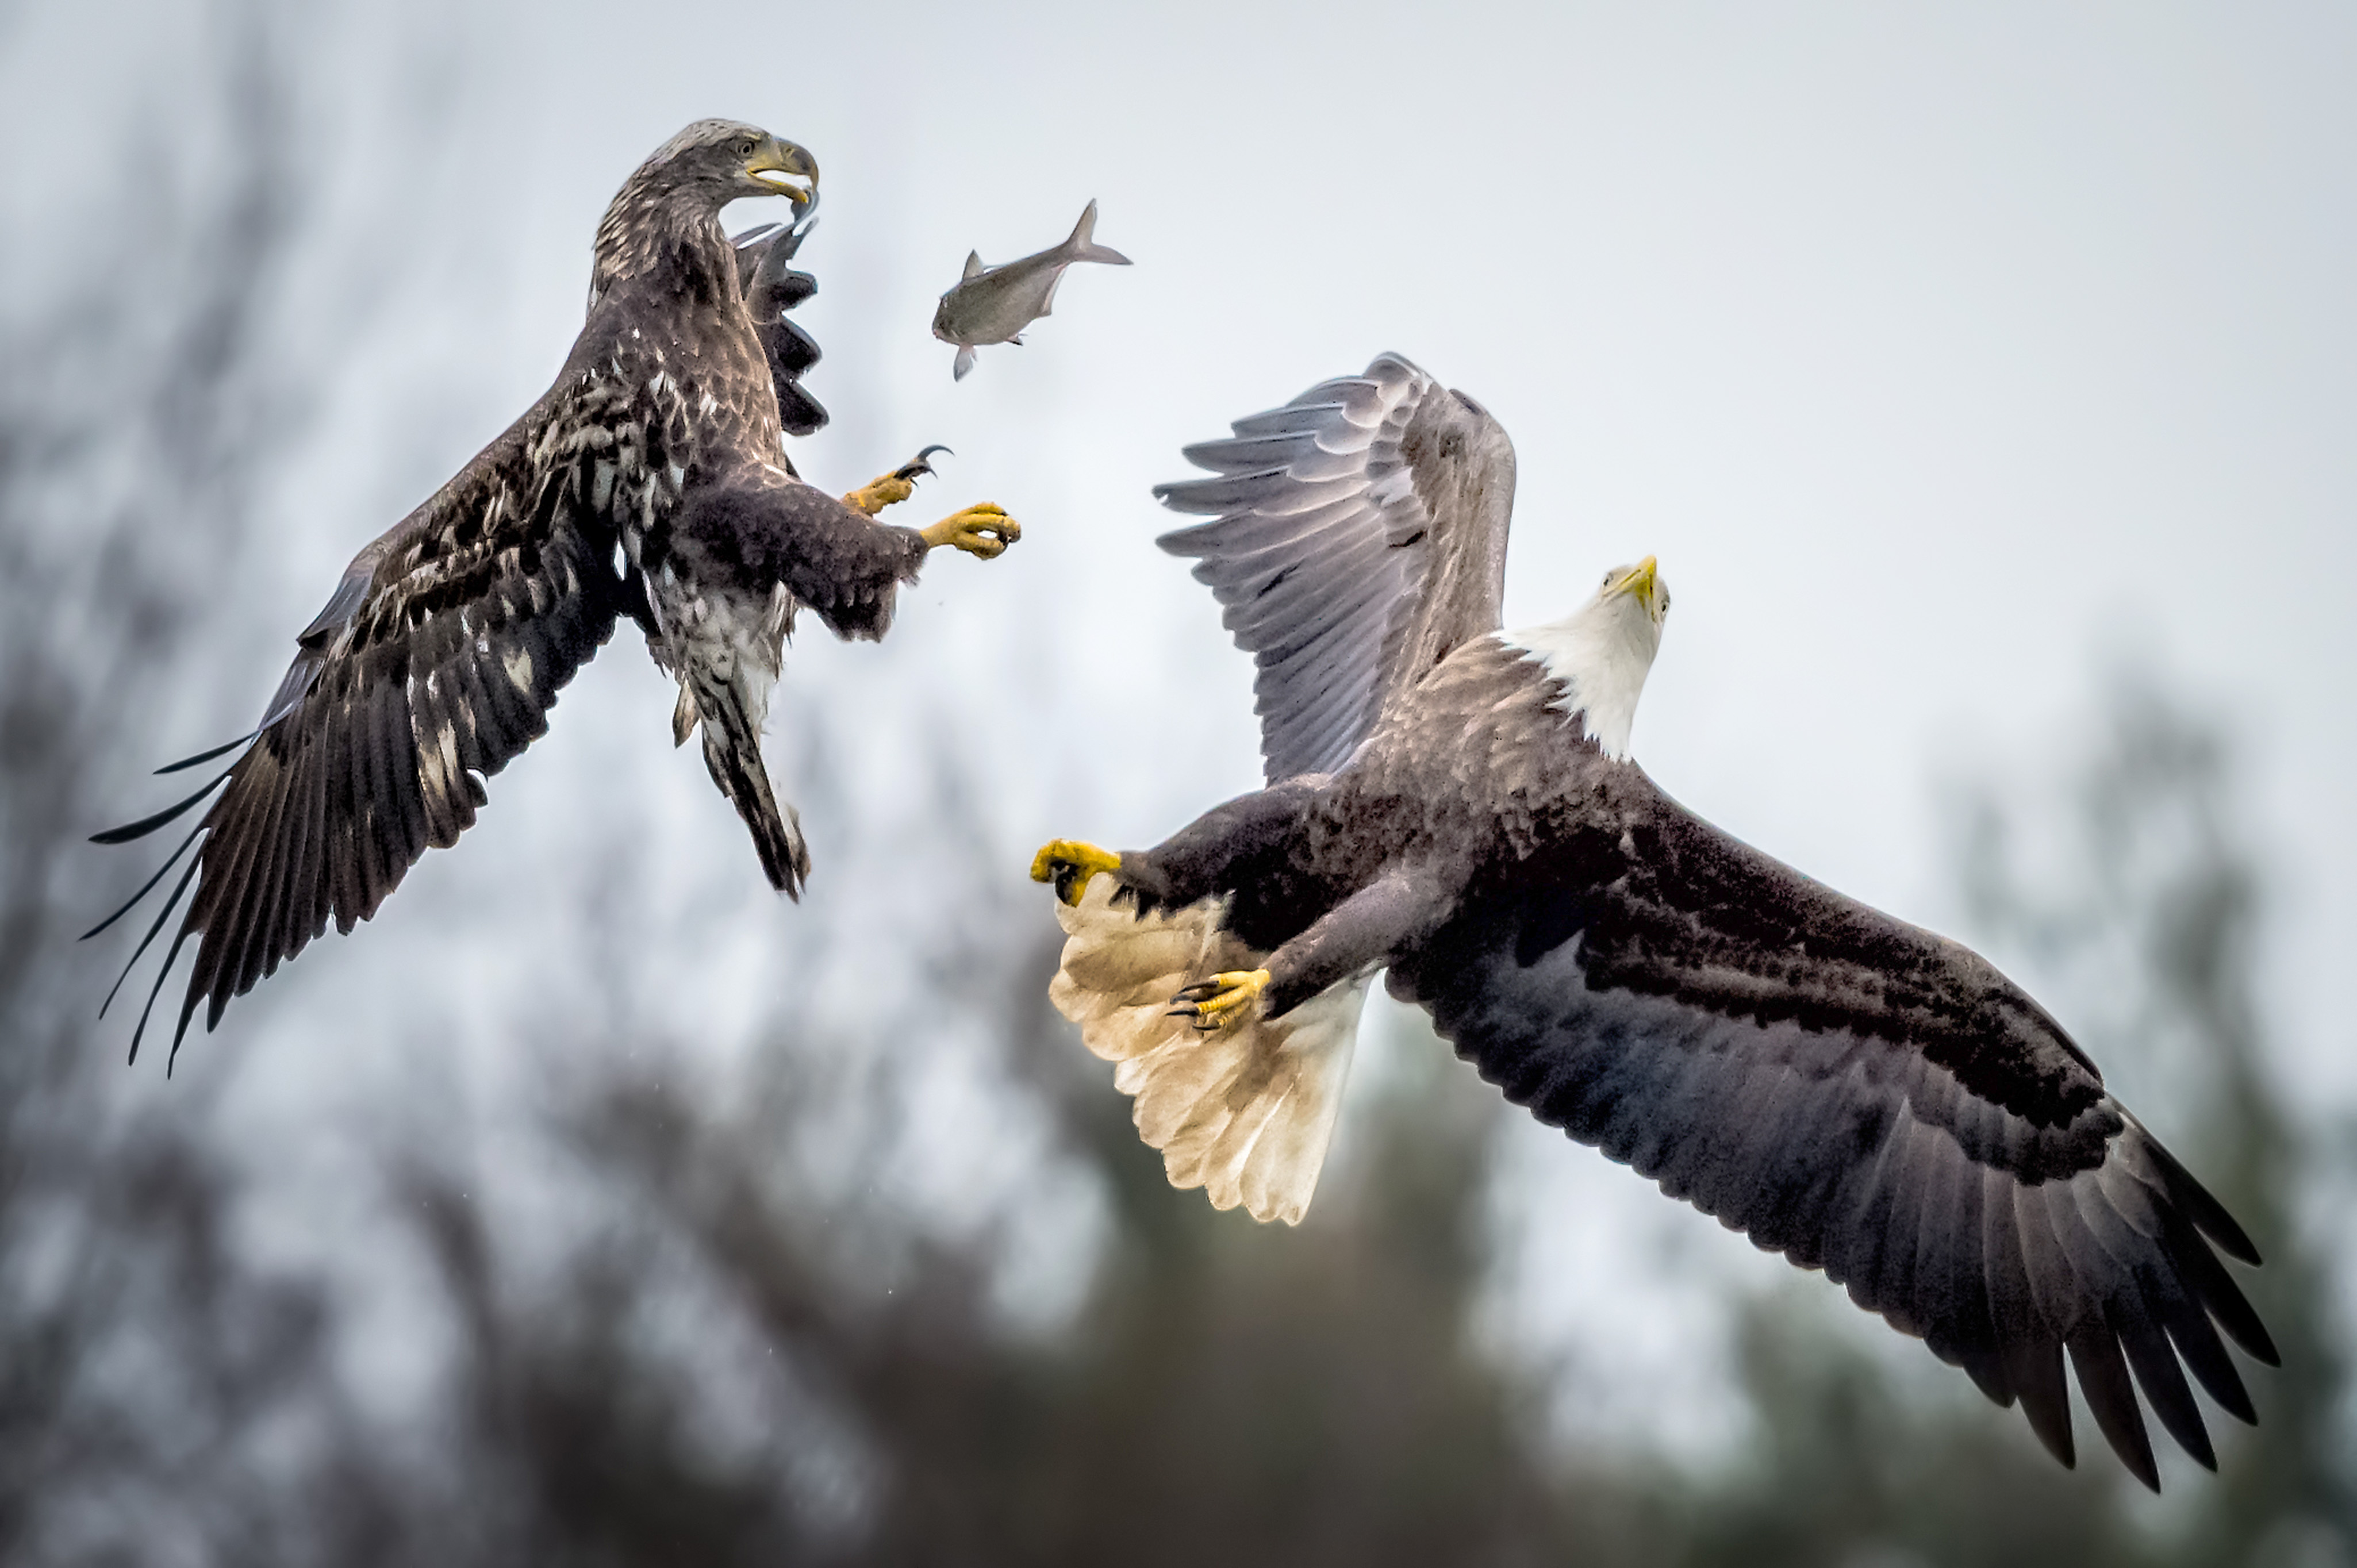 Bald eagles fish fight - Caters News Agency